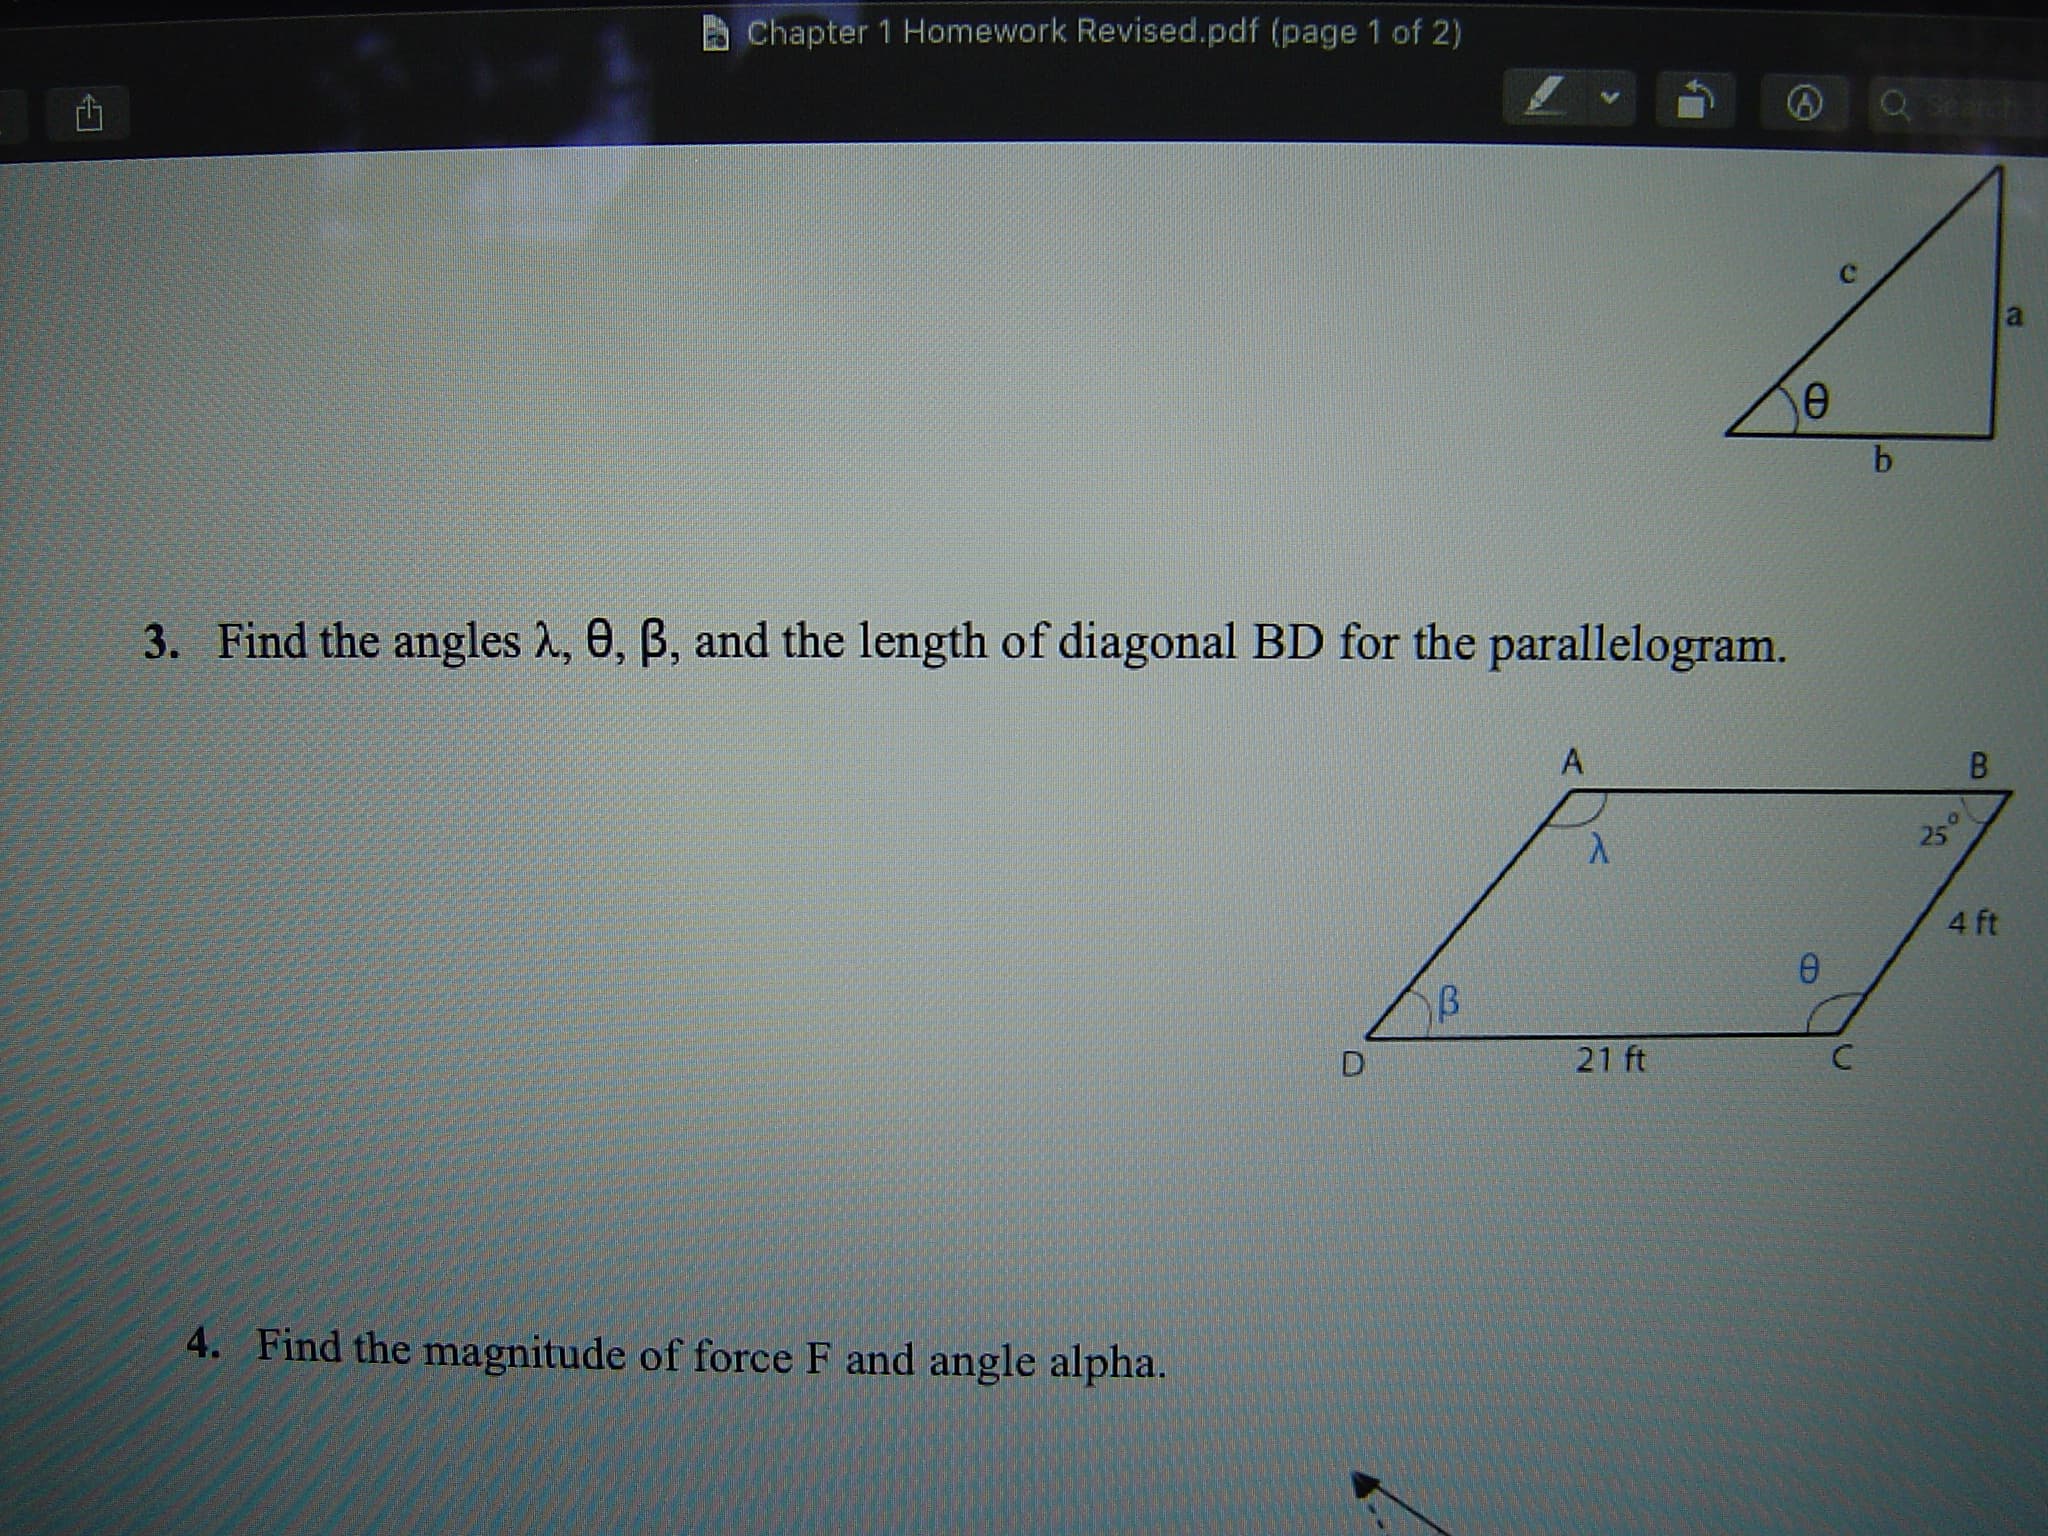 Find the angles 1, 0, B, and the length of diagonal BD for the parallelogram.
A
25°
4 ft
D
21 ft
